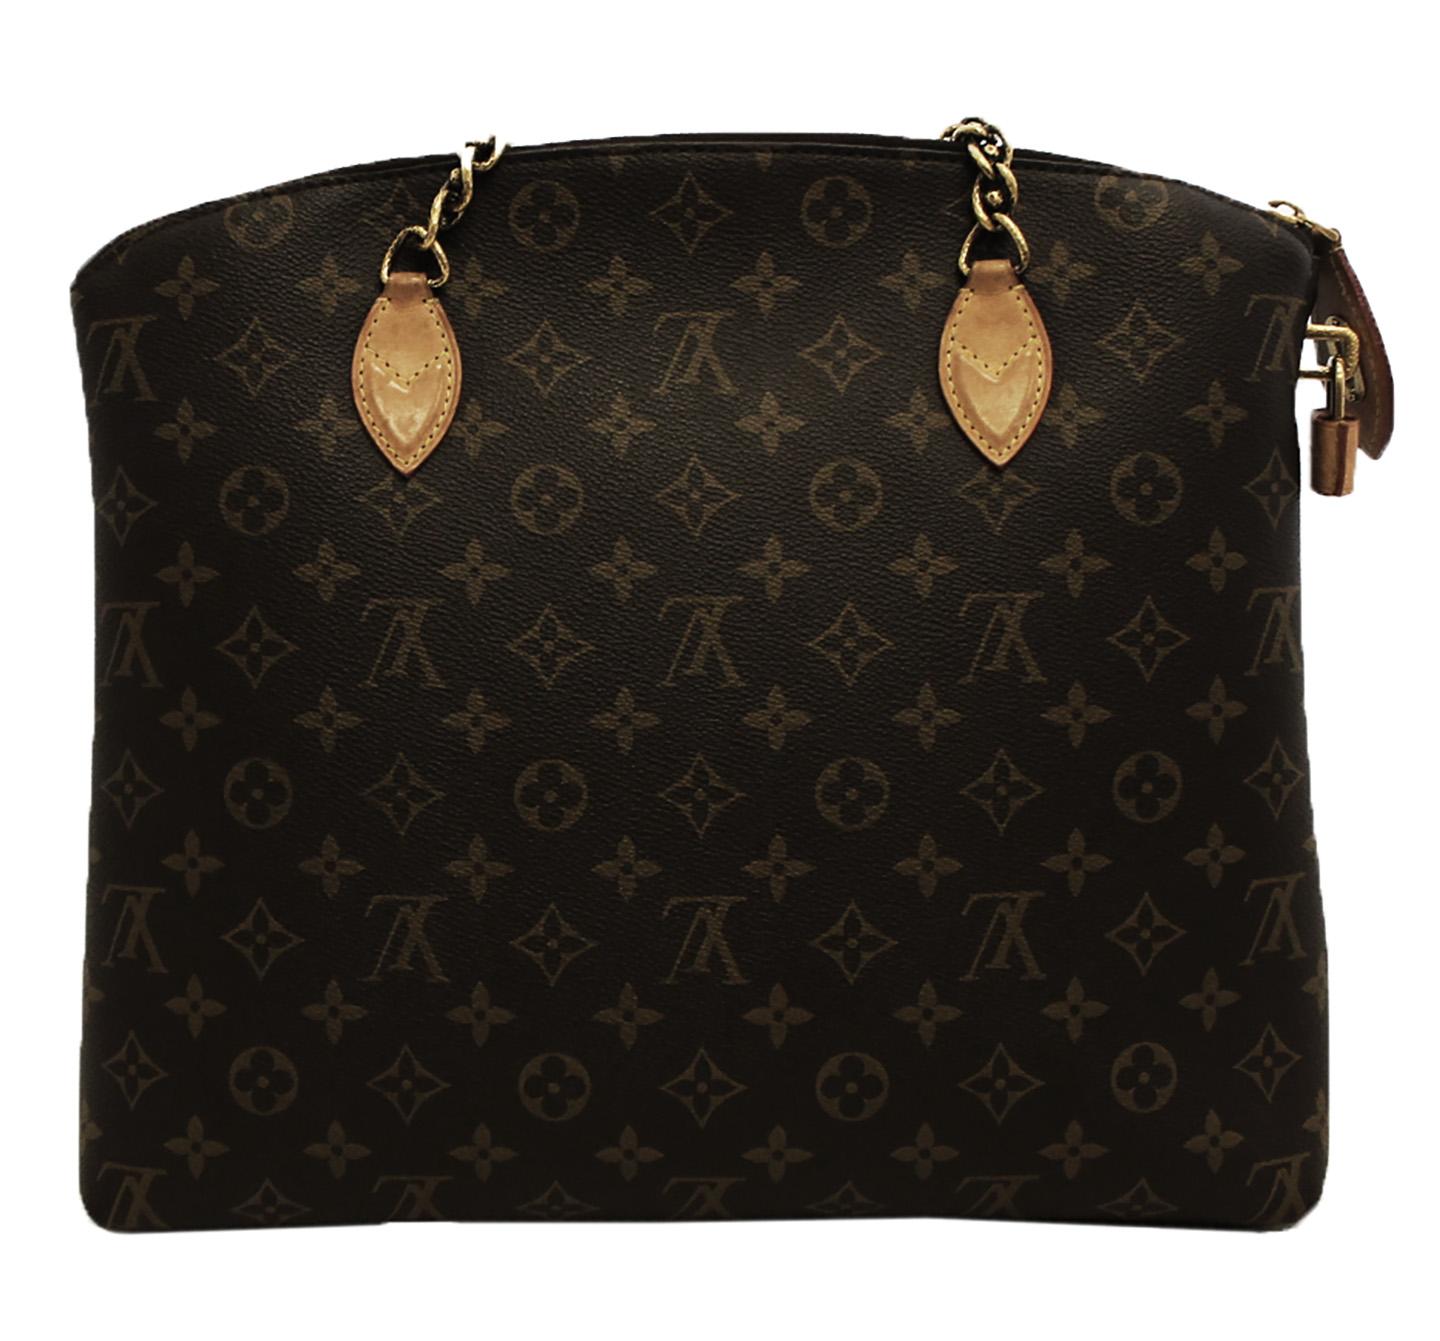 Louis Vuitton brown and tan monogram Lockit bag from the fall 2013/ winter 2014, includes two antiqued chain handles with a middle leather section for added comfort.   The handbag features a zipper over the wide arching top that seals with a lock